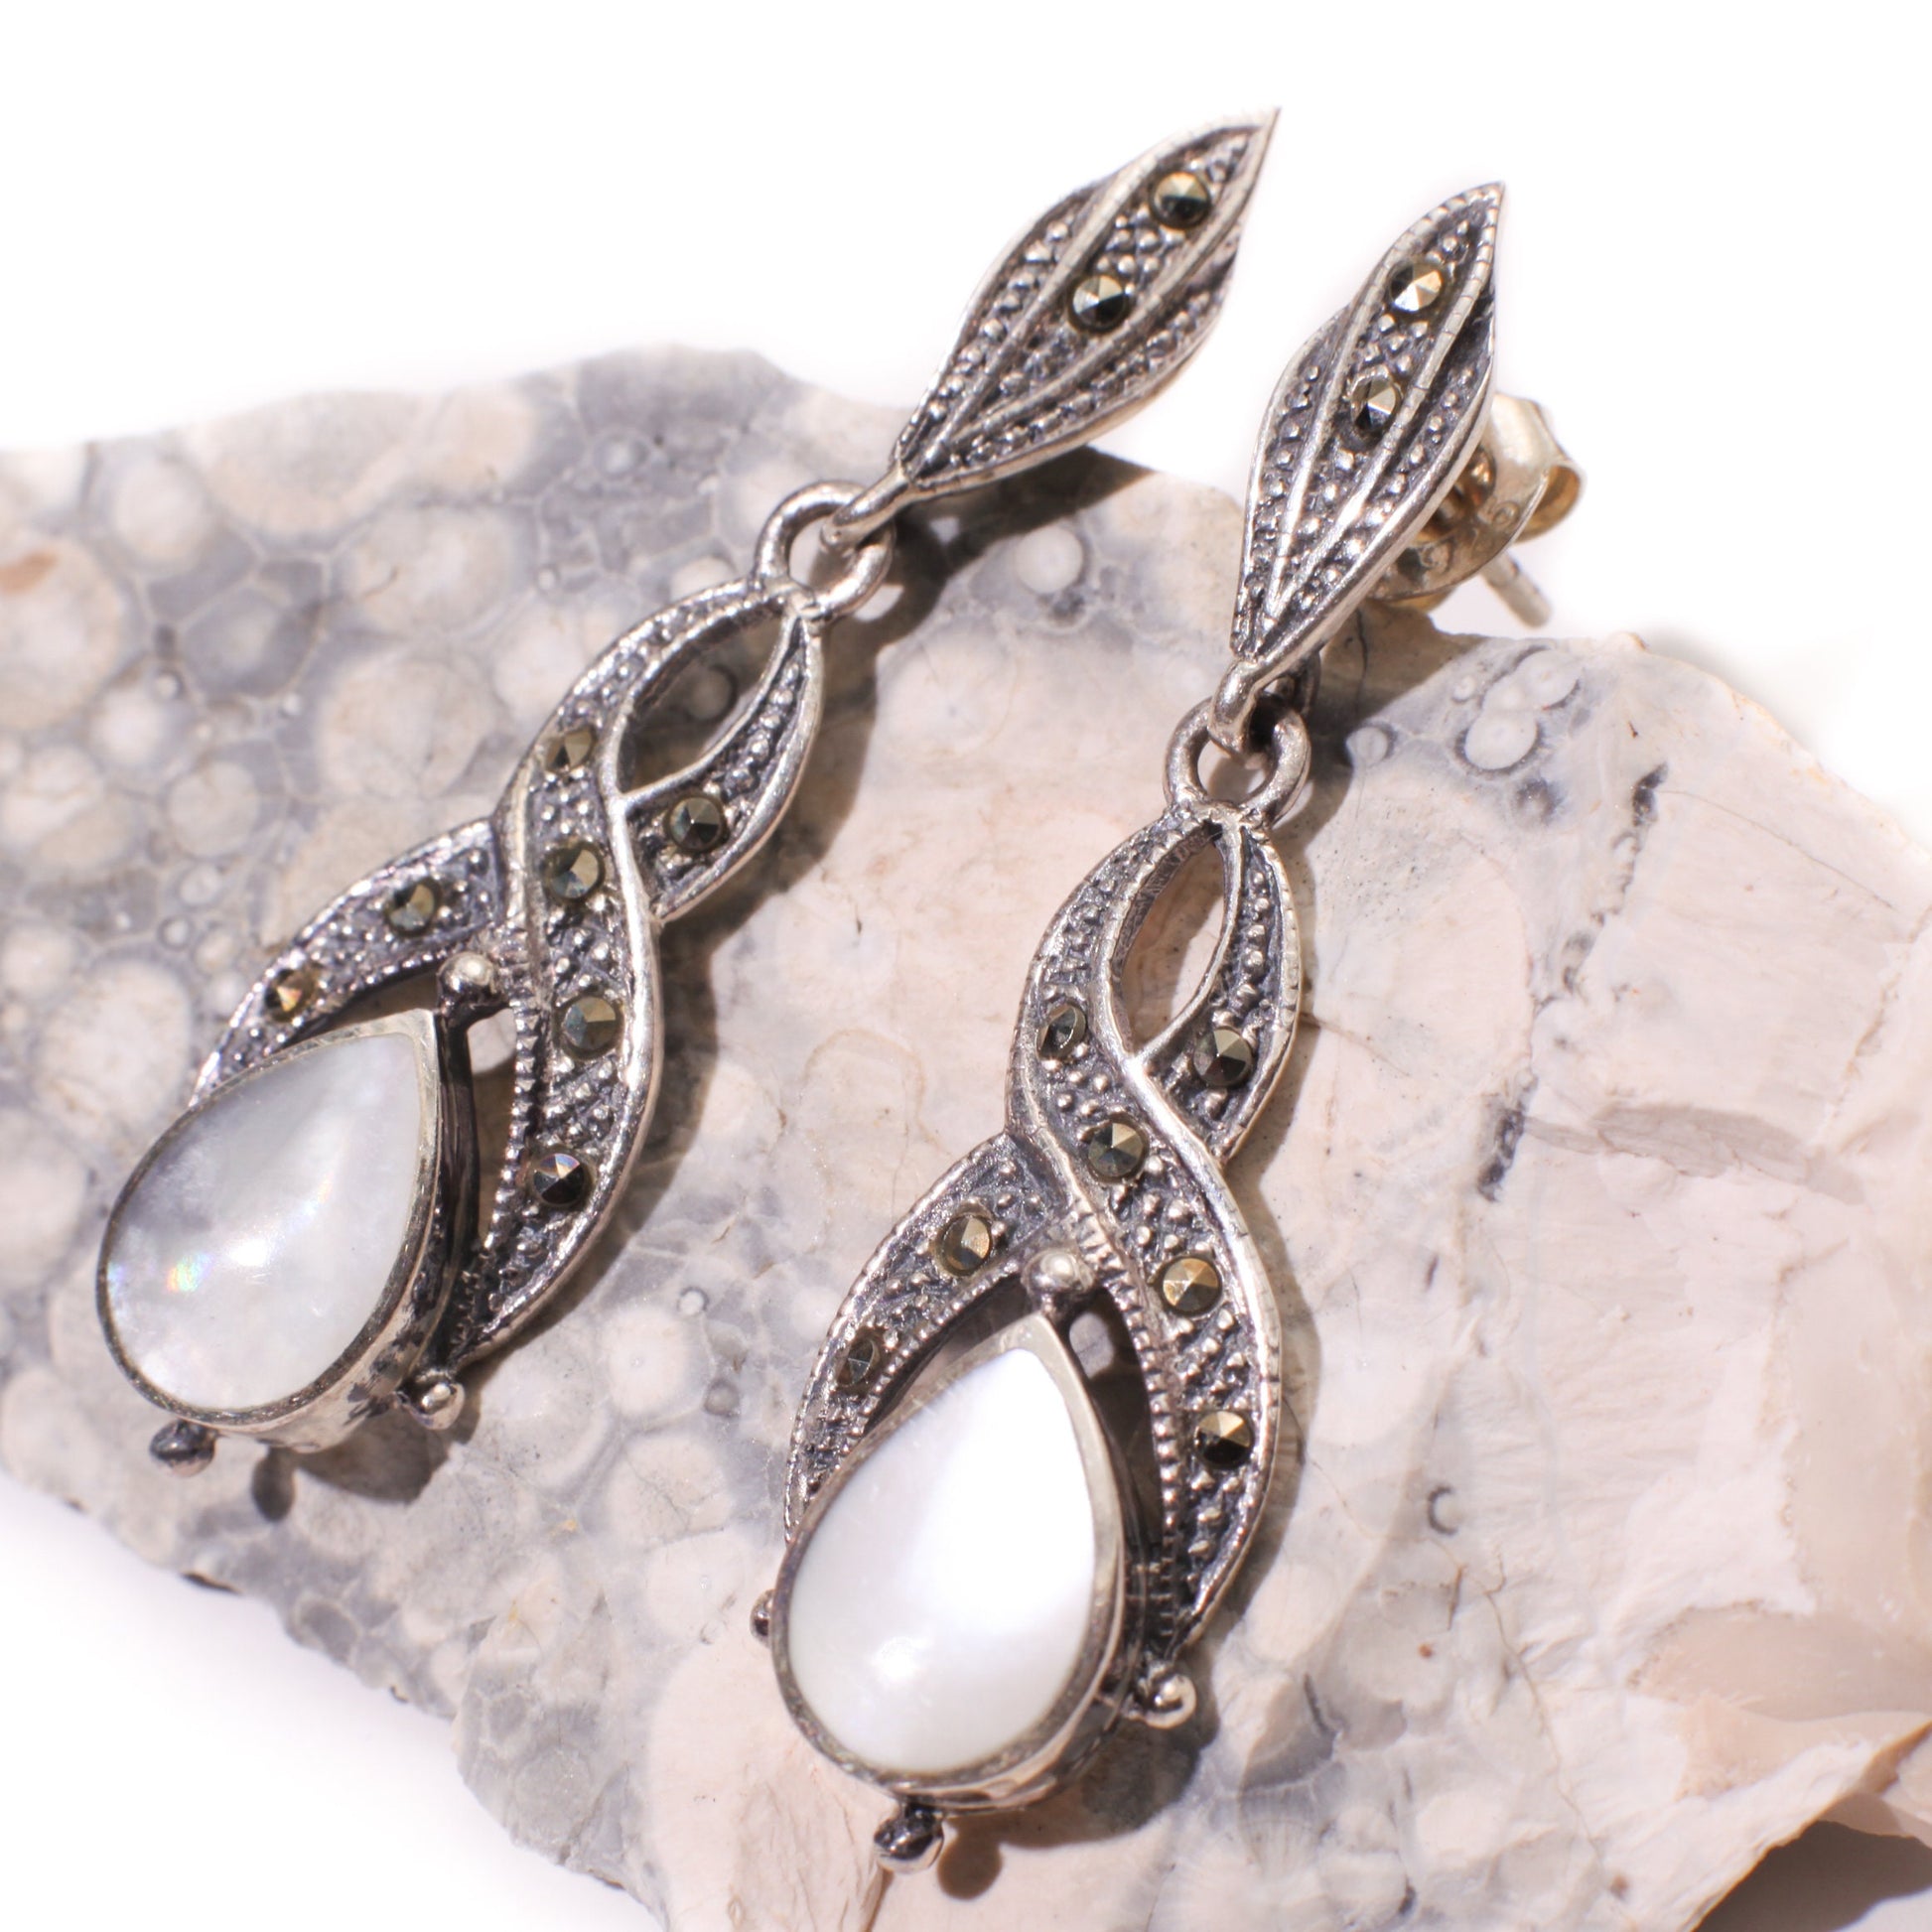 Marcasite 925 Sterling Silver Earrings Post with Dangle White Mother of Pearl, Vintage, Antique Marcasite Earrings 11x40mm Gift for her